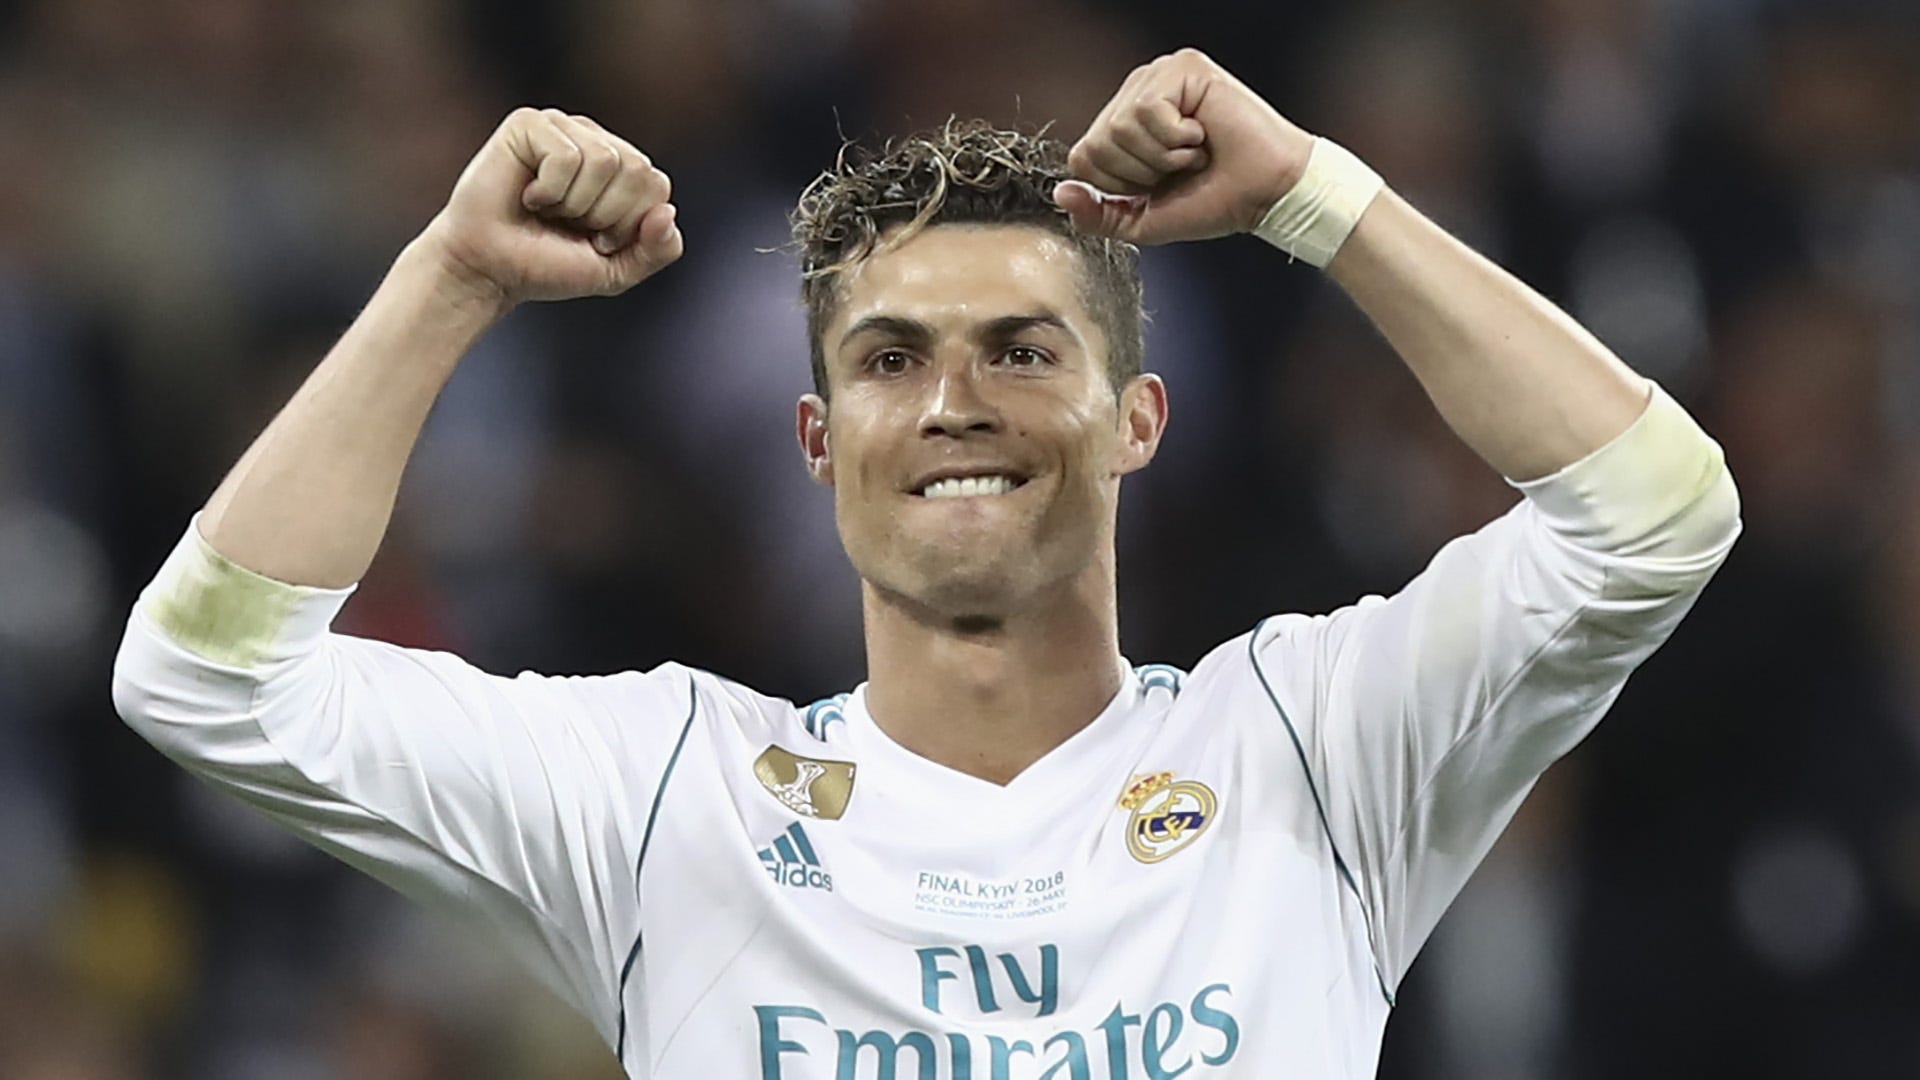 LaLiga - Cristiano Ronaldo: 88 goals in 86 matches with Real